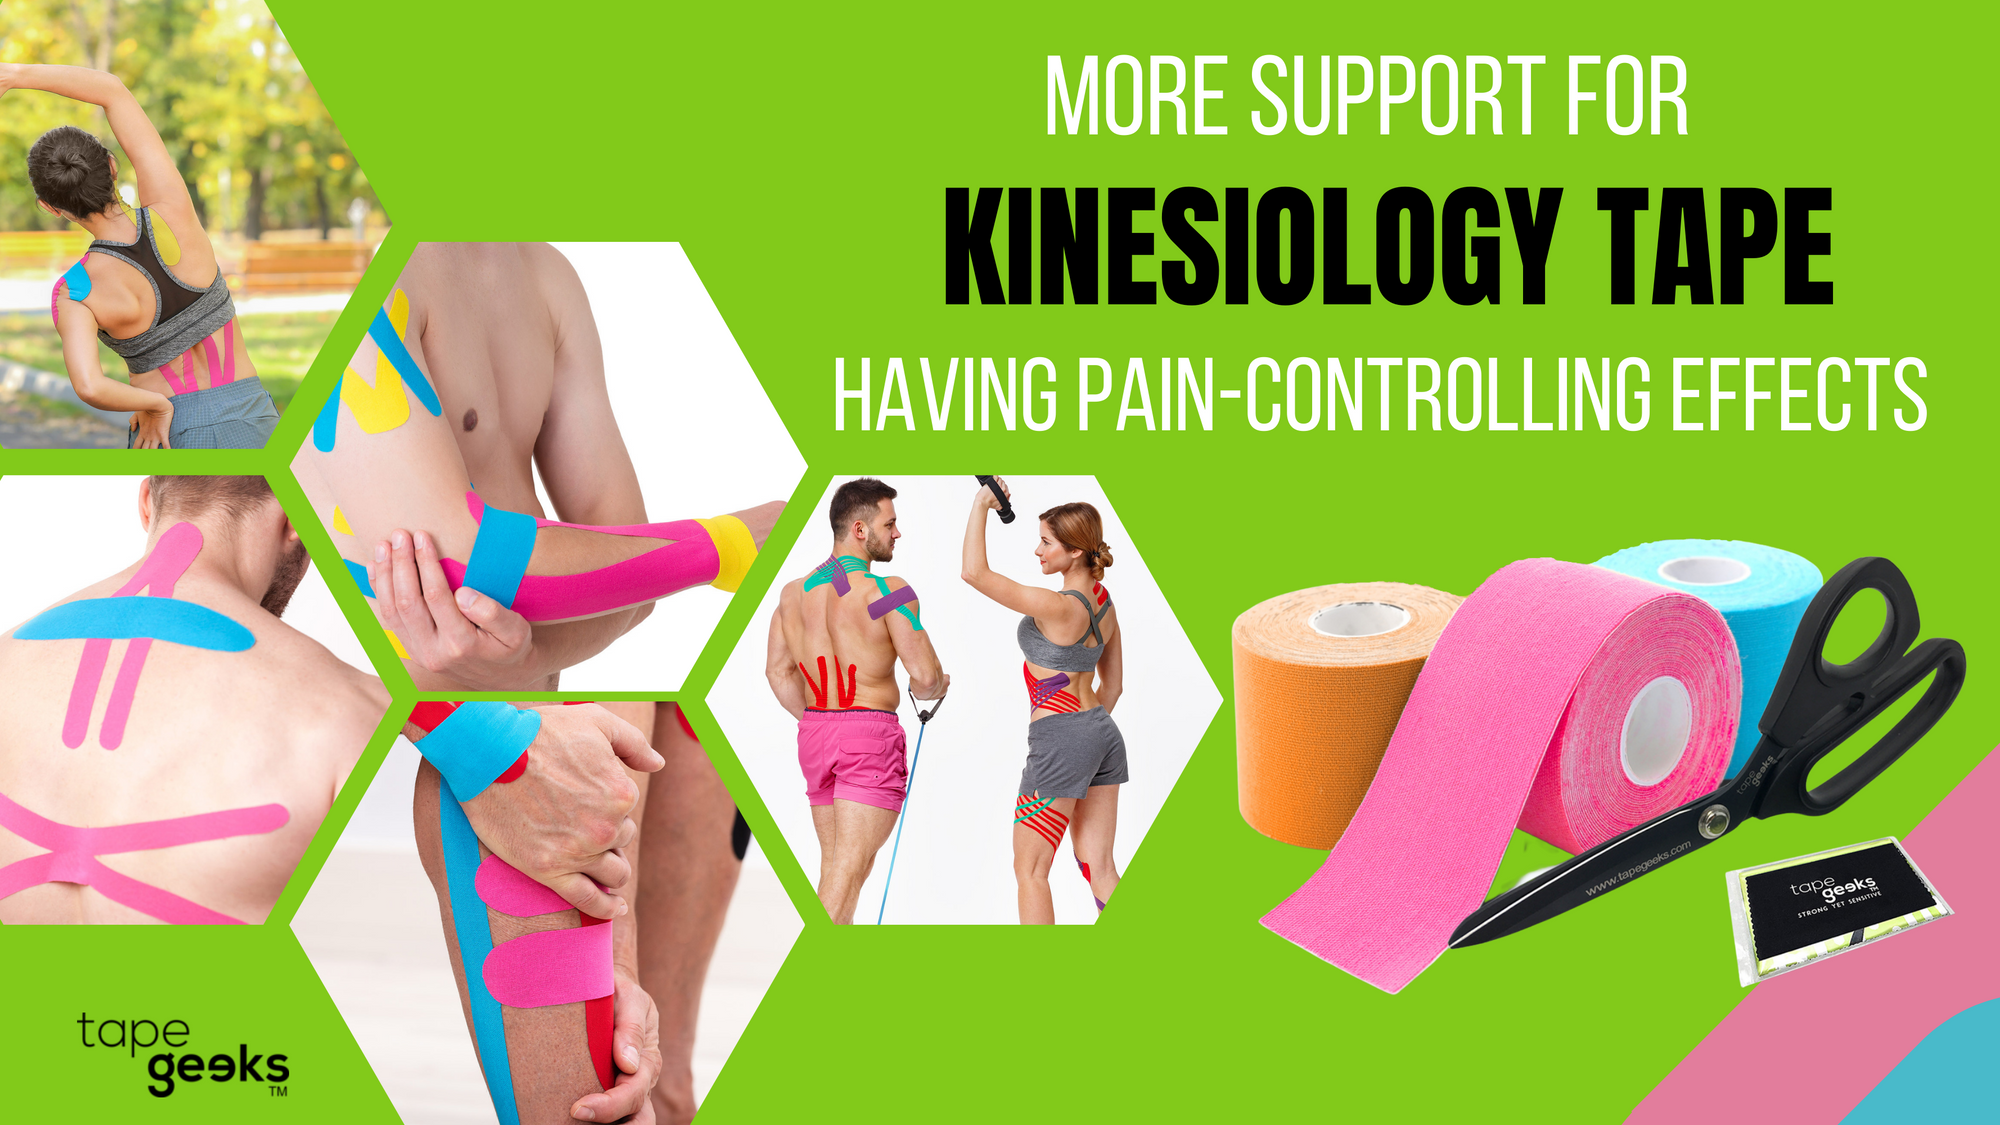 Does kinesiology tape relieve pain?